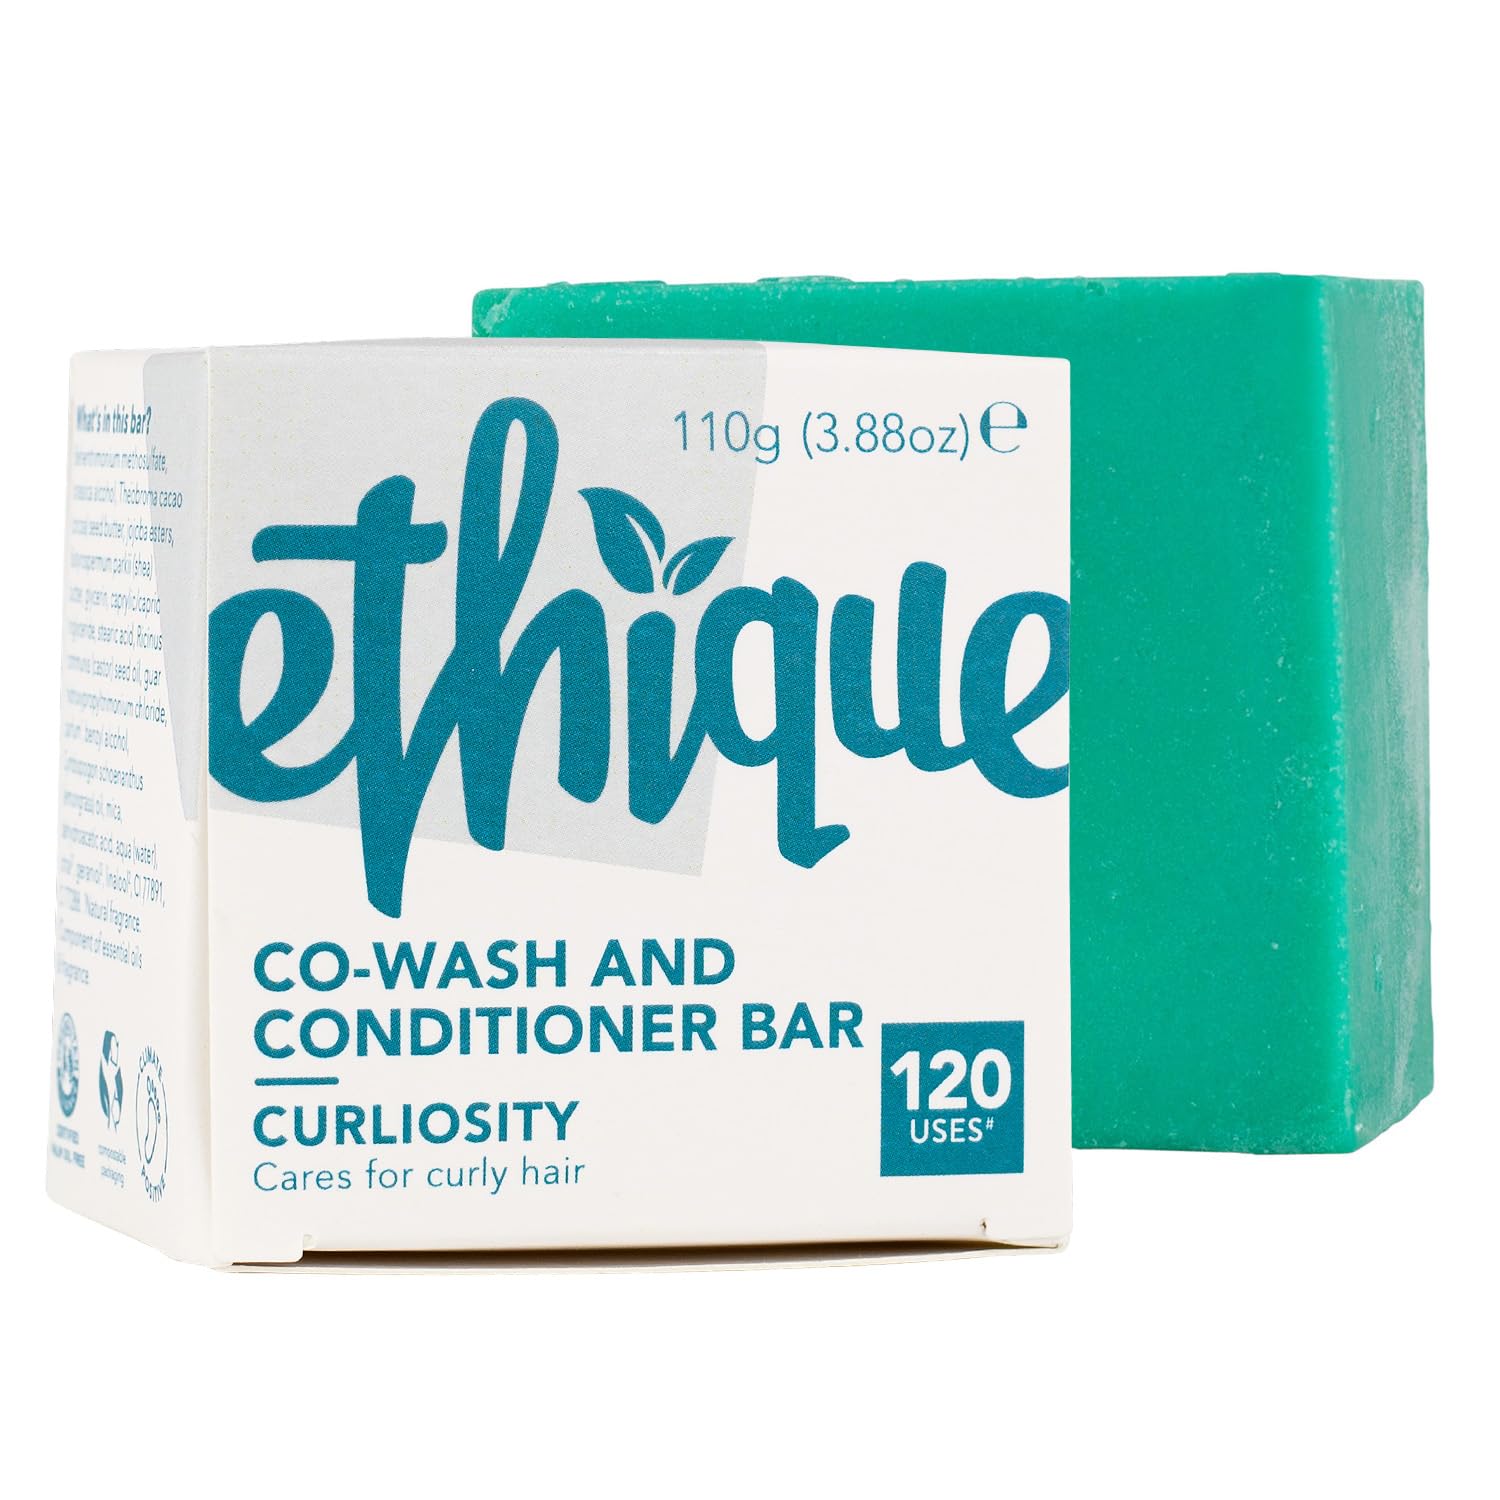 Ethique Curl Conditioner Bar for for Thick, Curly Hair - Curliosity |Curl Defining, Deeply Moisturizing, Vegan, Cruelty-Free, 3.88 oz